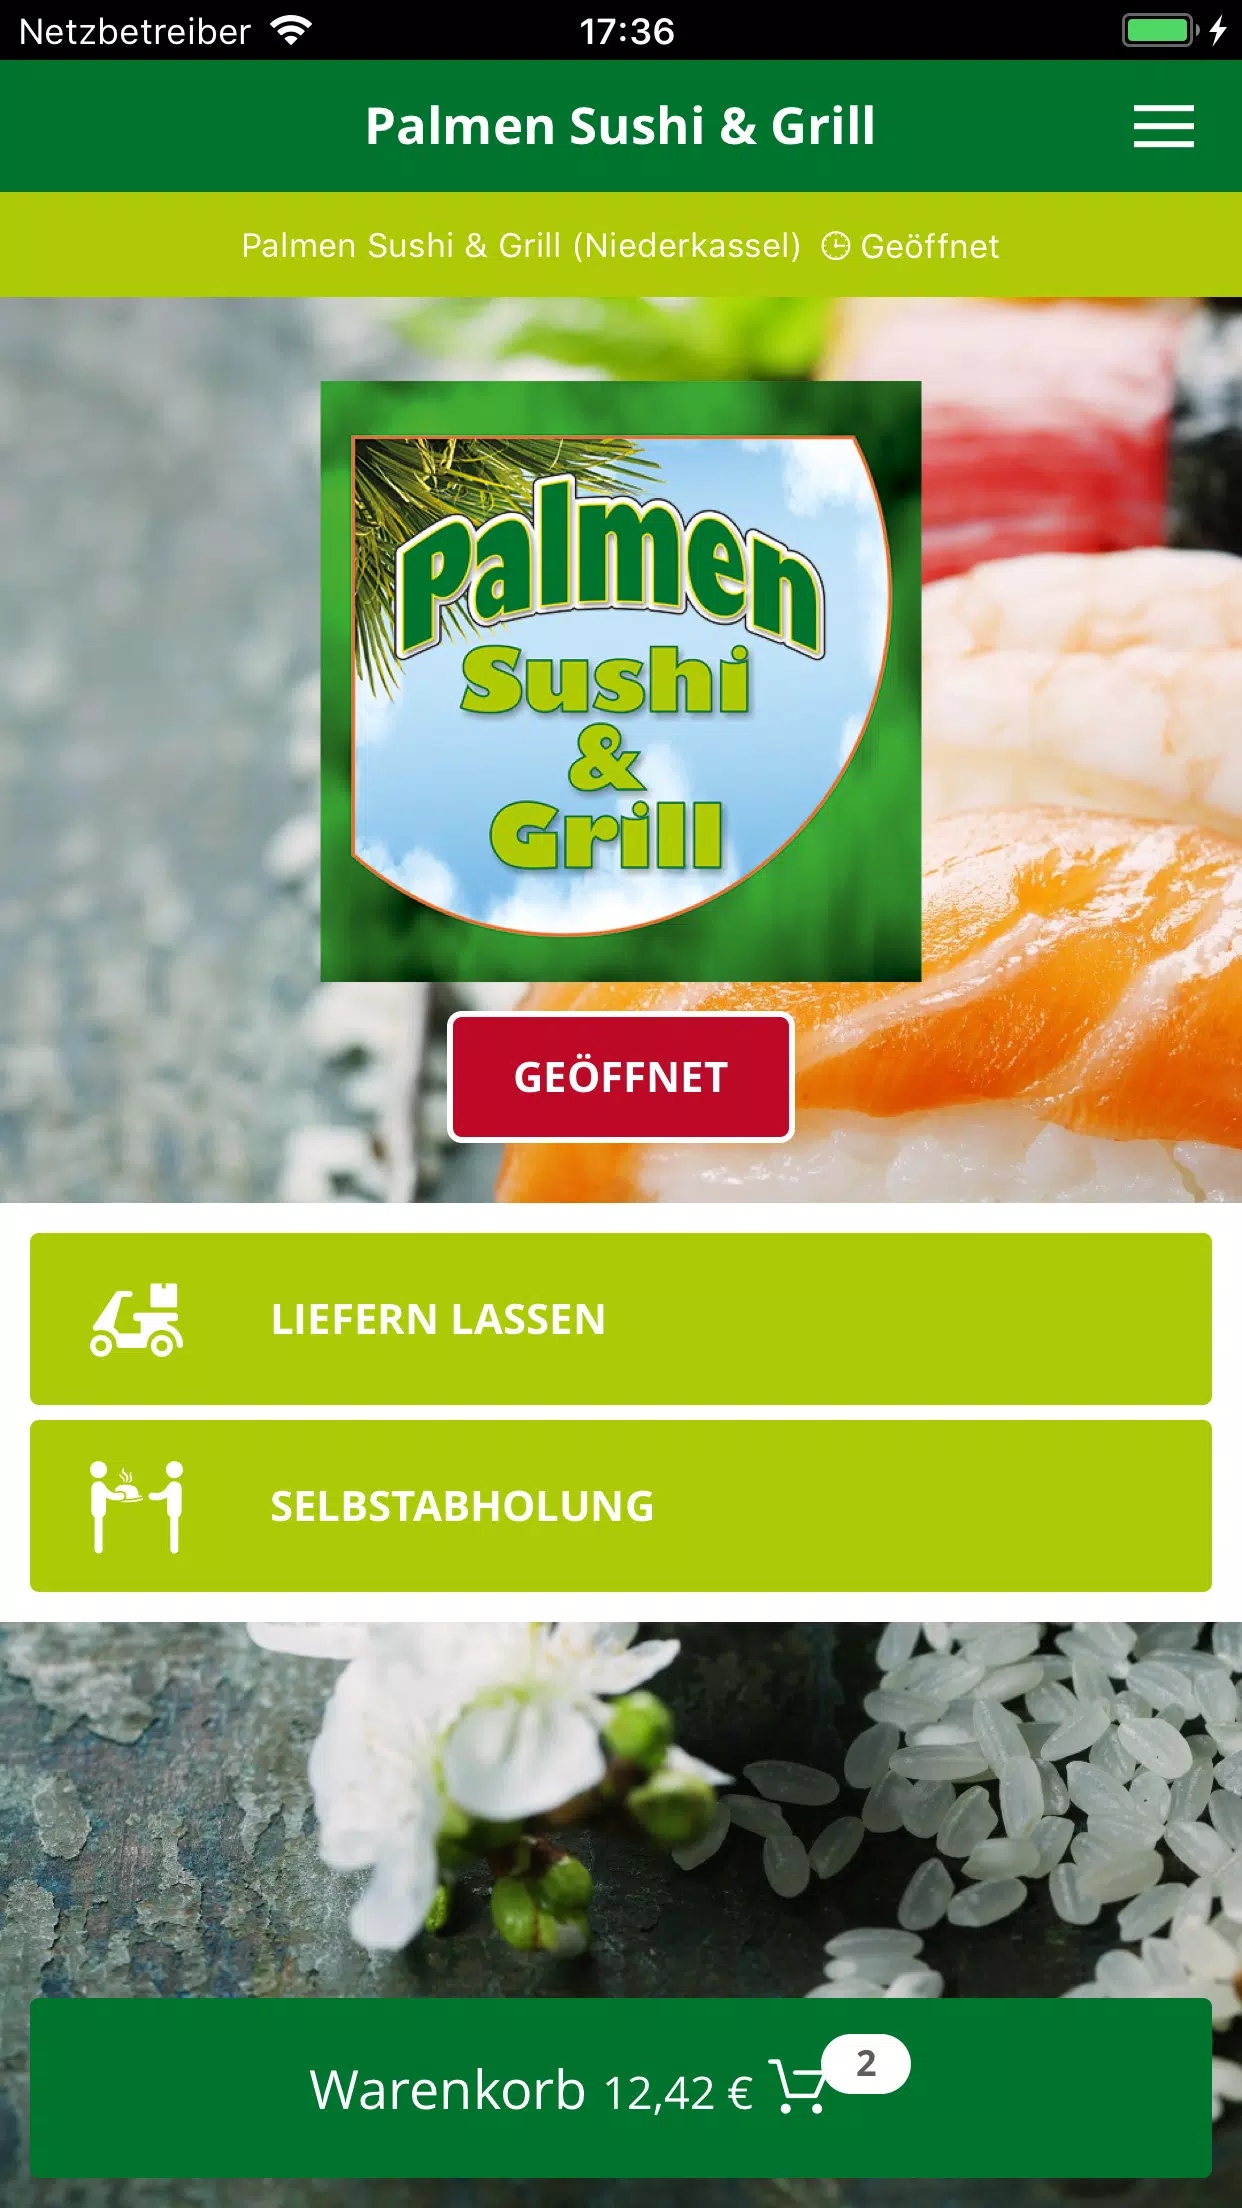 Palmen Sushi & Grill for Android - APK Download